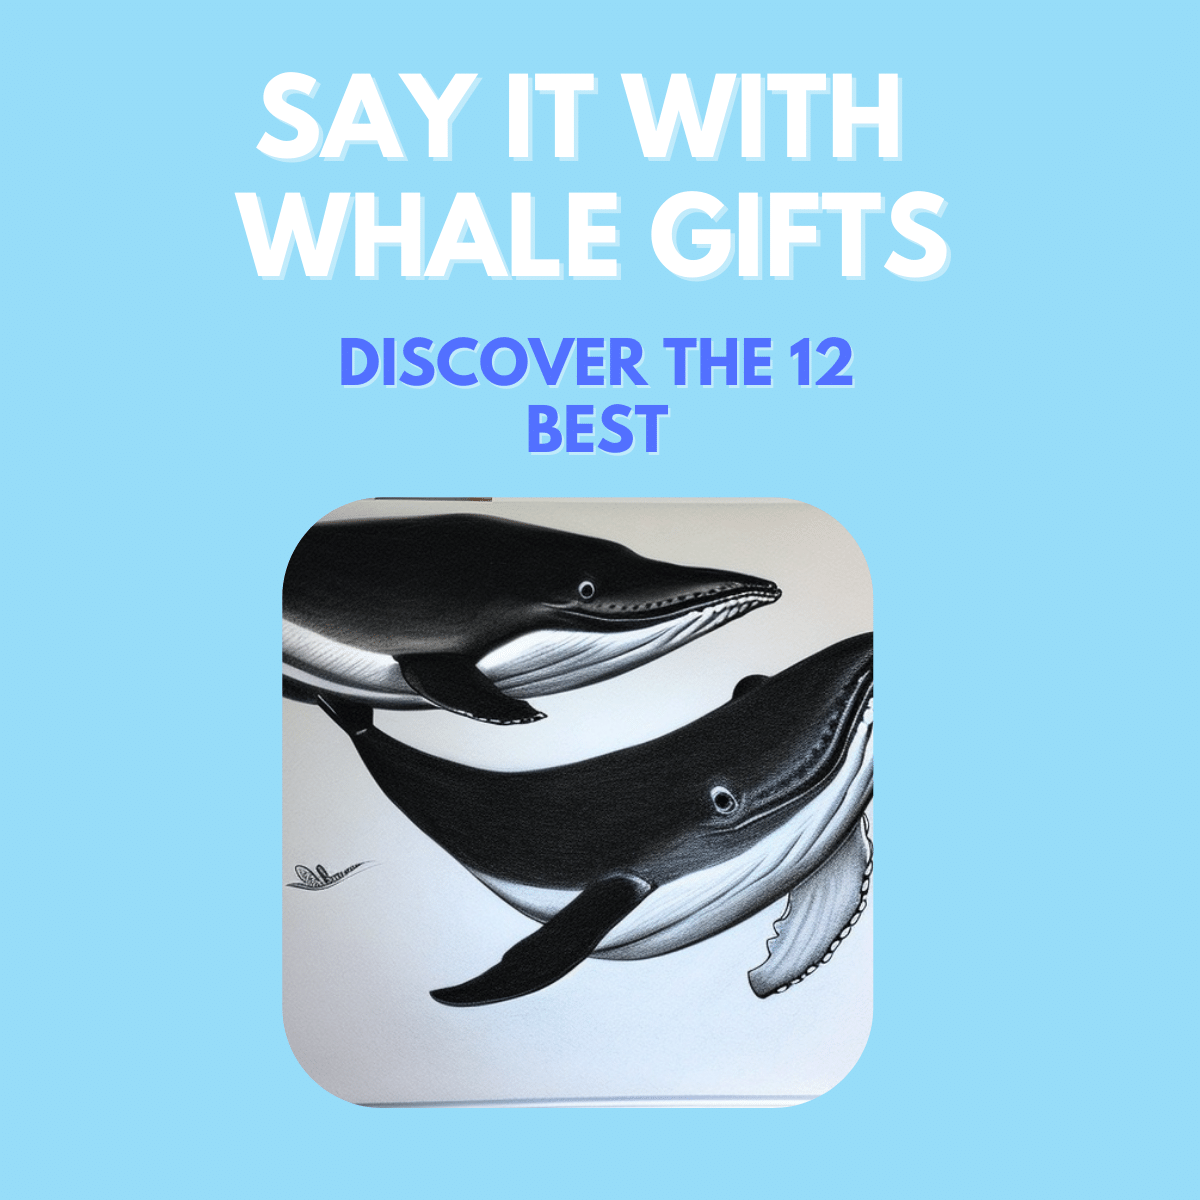 Say it with Whale Gifts-Discover the 12 Best